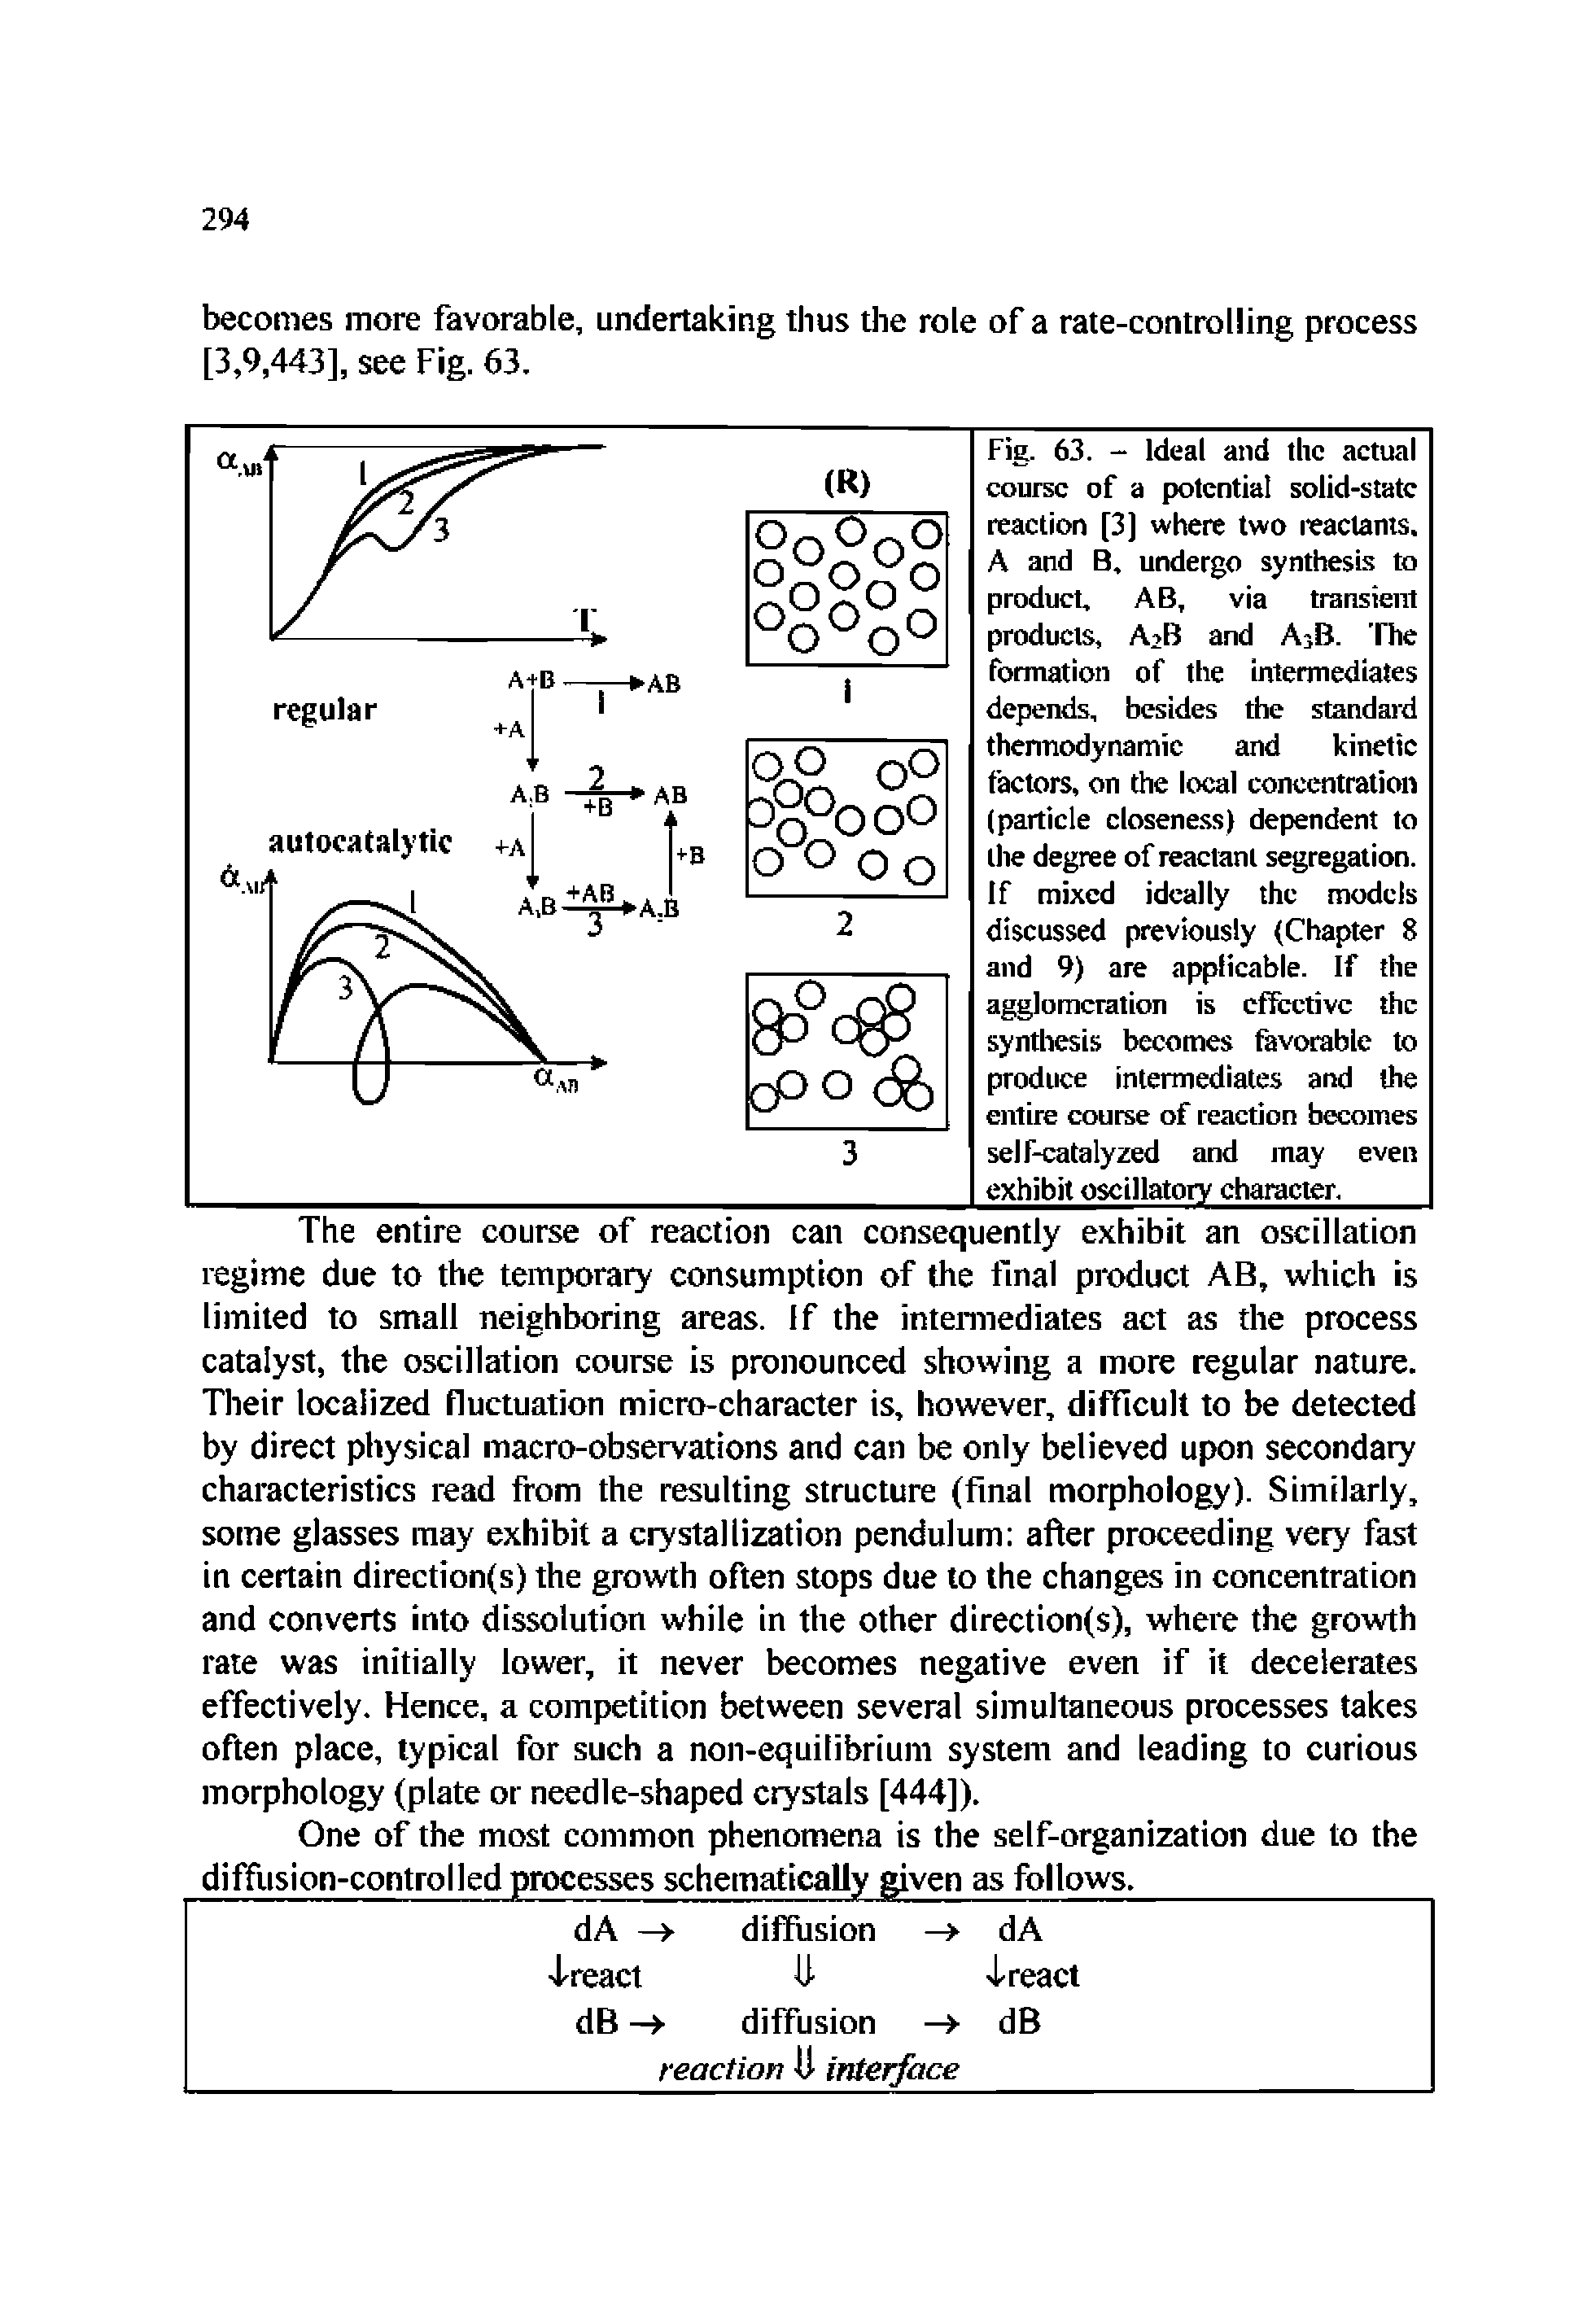 Fig. 63. - Ideal and the actual course of a potential solid-state reaction [3] where two leaclams. A and B, undergo synthesis to product, AB, via transient products, AiB and A3B. The formation of the intermediates depends, besides the standard thennodynamic and kinetic factors, on the local concentration (particle closeness) dependent to the degree of reactant segregation. If mixed ideally the models discussed previously Chapter 8 and 9) are applicable. If the agglomeration is effective the synthesis becomes favorable to produce intermediates and the entire course of reaction becomes self-catalyzed and may even exhibit oscillatory character. ...